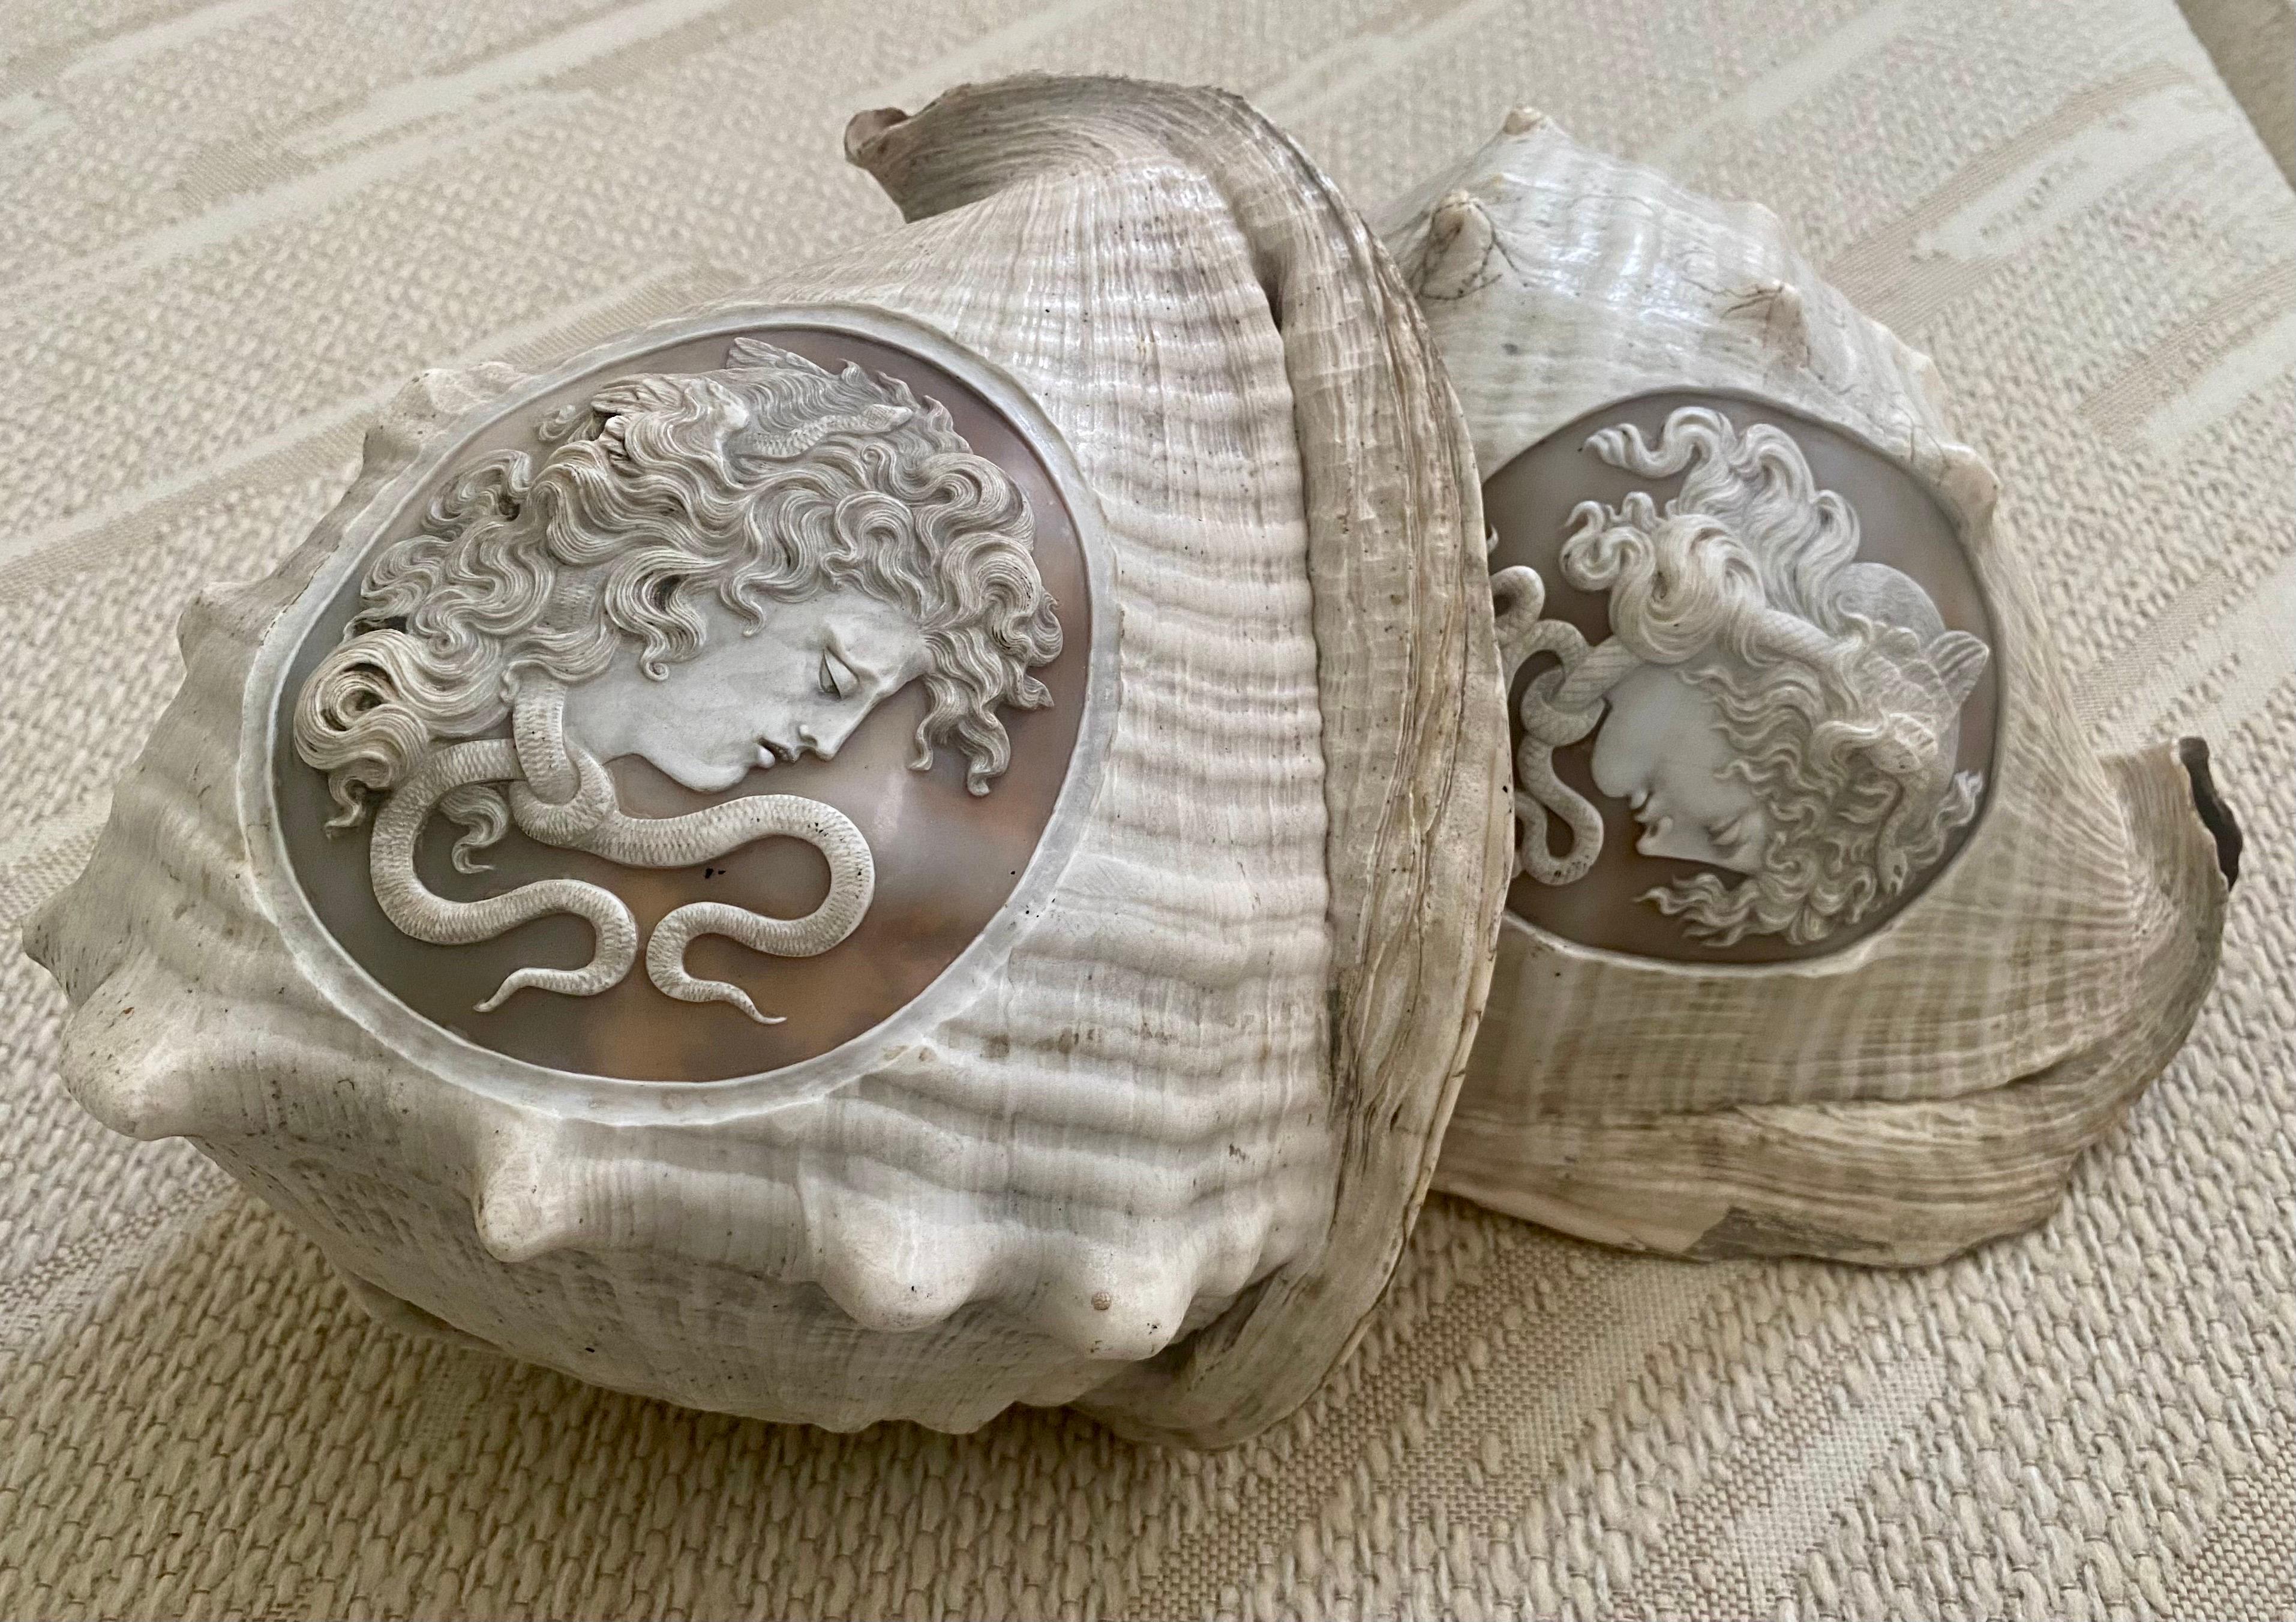 Pair of Italian Cameo 19th Century Carved Conch Shells For Sale 3